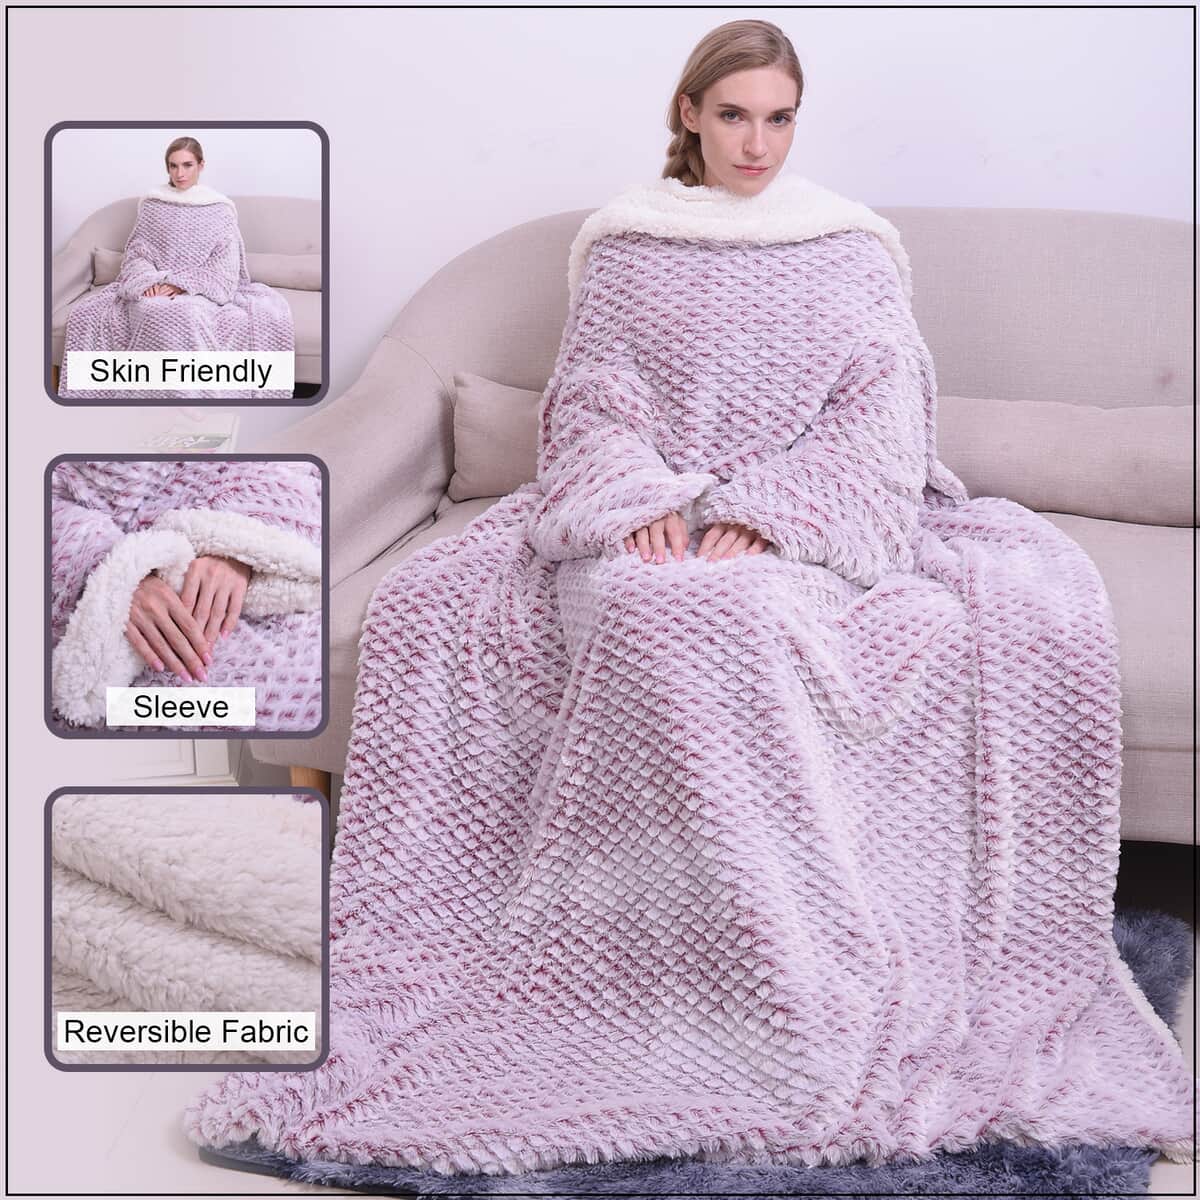 HOMESMART Checkered Pattern Faux Fur Soft and Cozy Reversible Sherpa TV Blanket with Sleeves image number 1